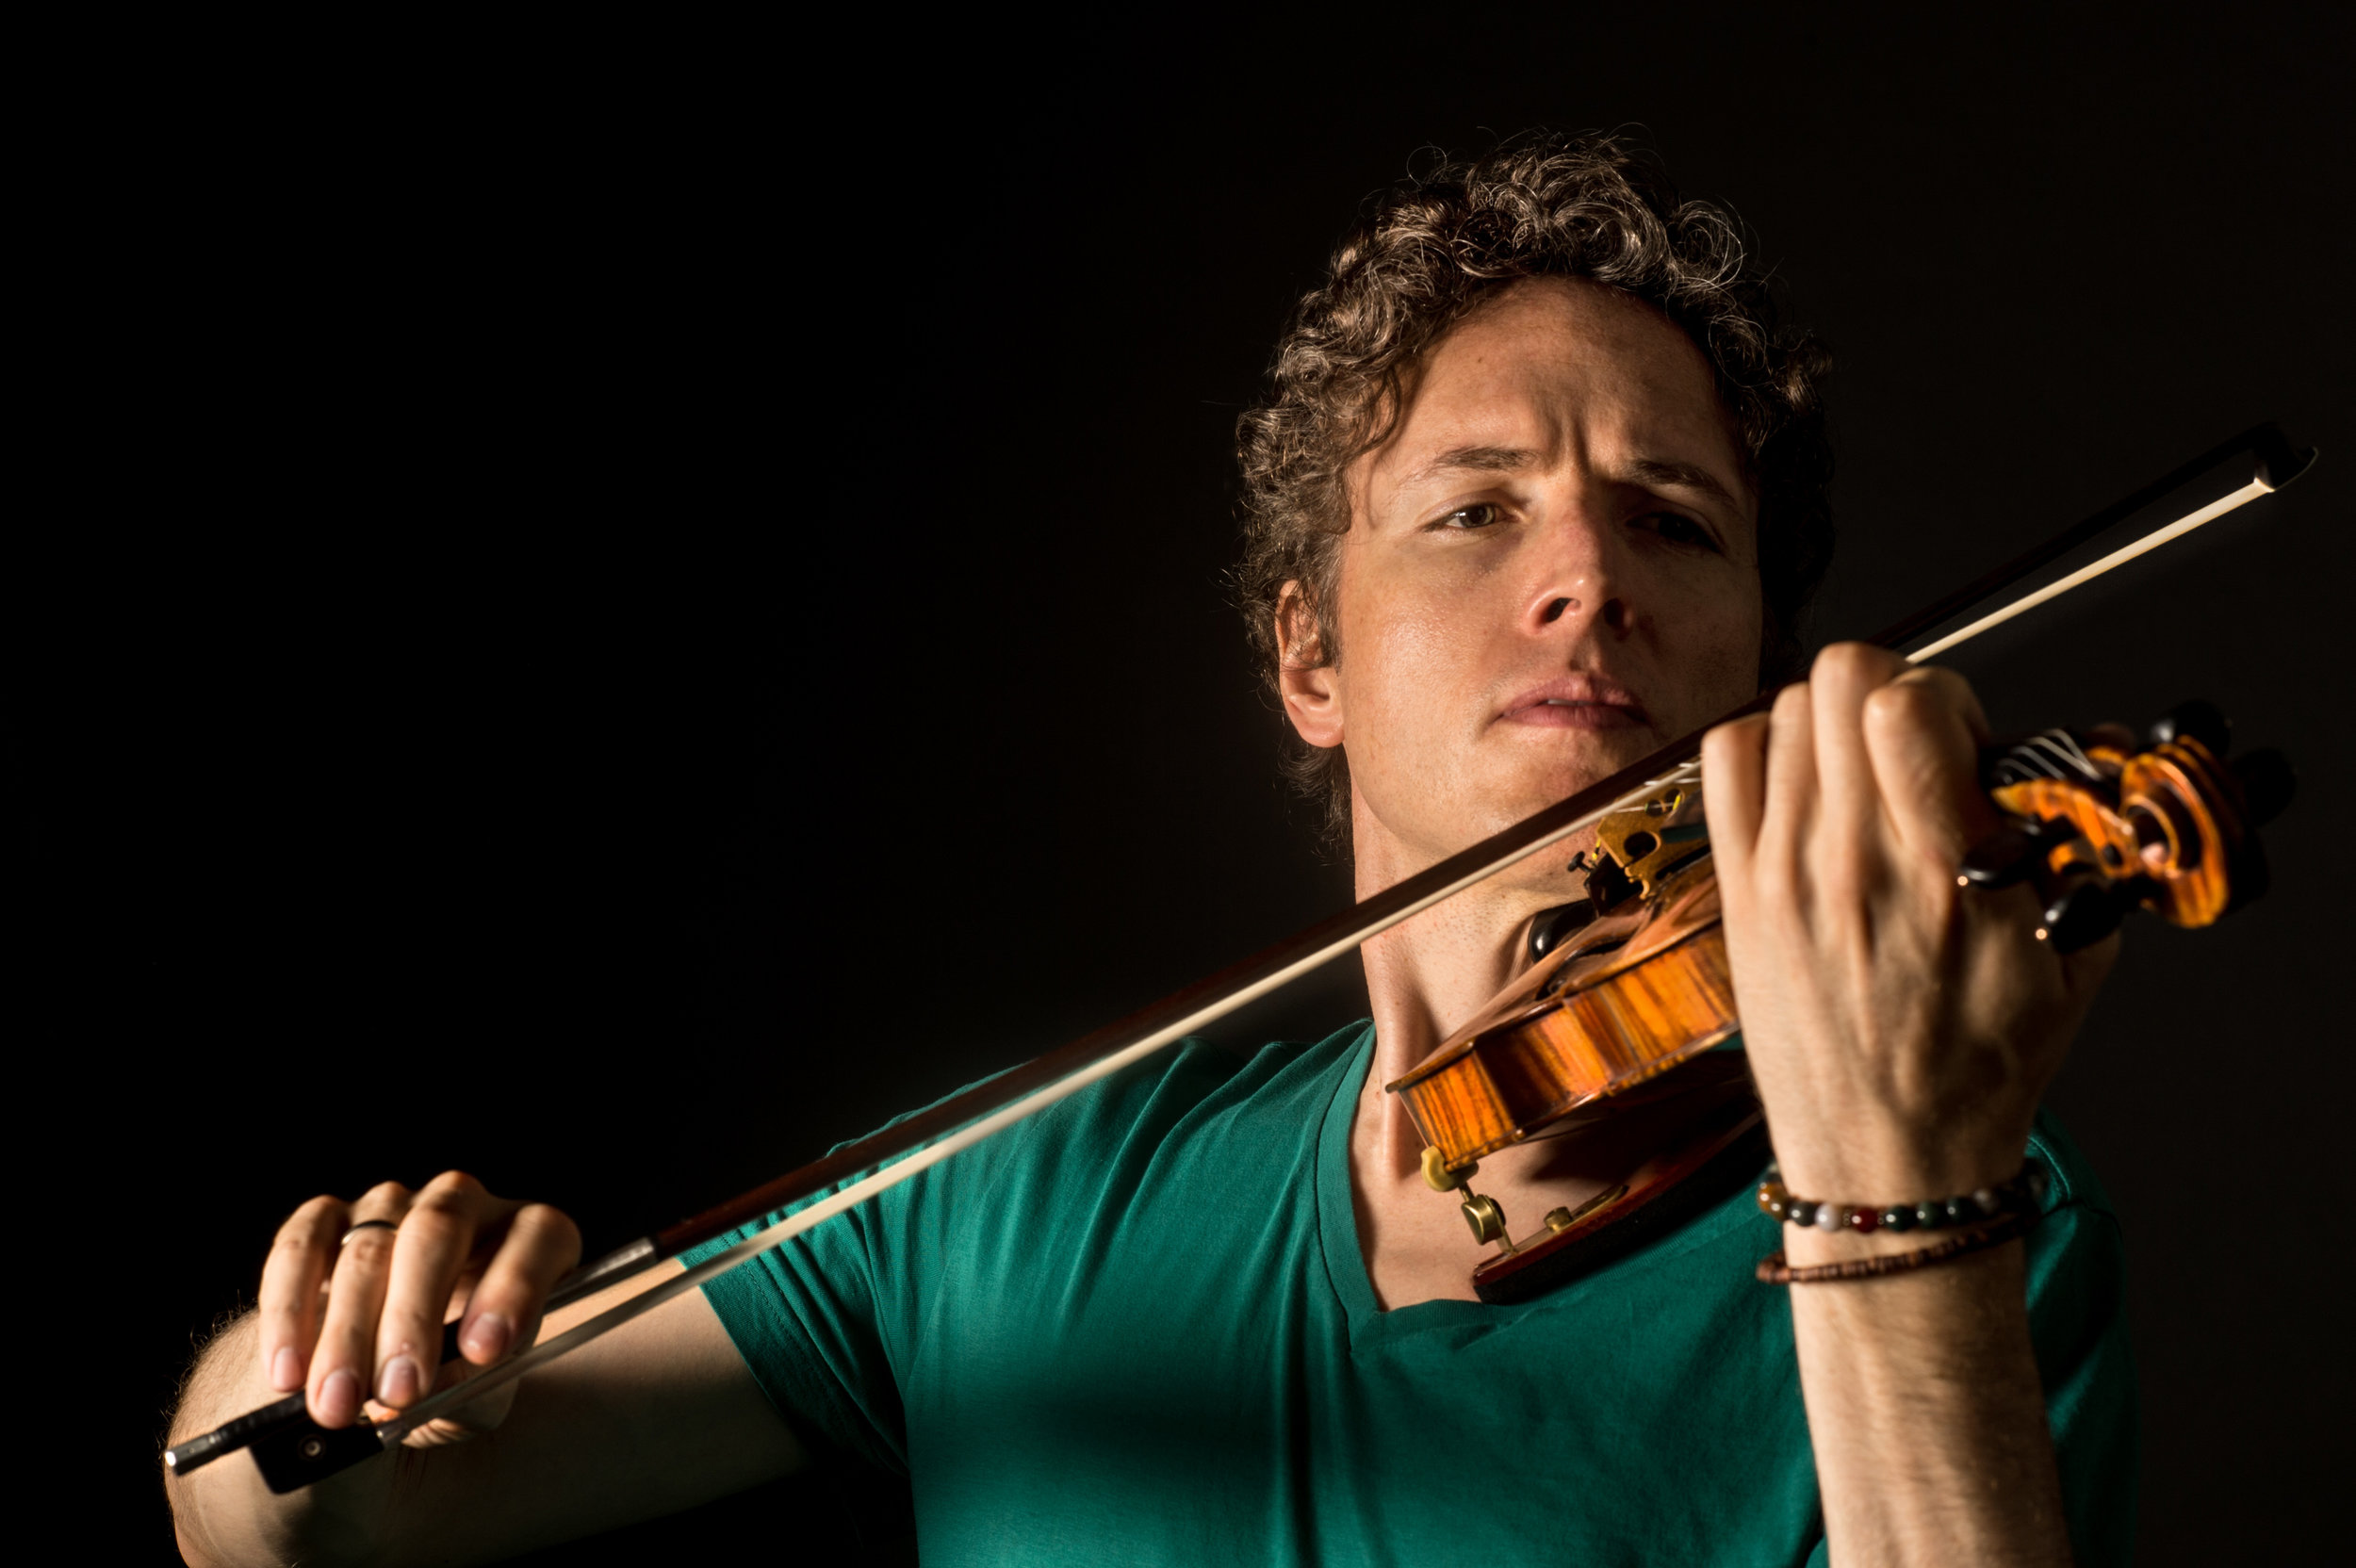 For more information on violin soloist Timothy Fain, visit his website. Photo credit: Michael Weintrob